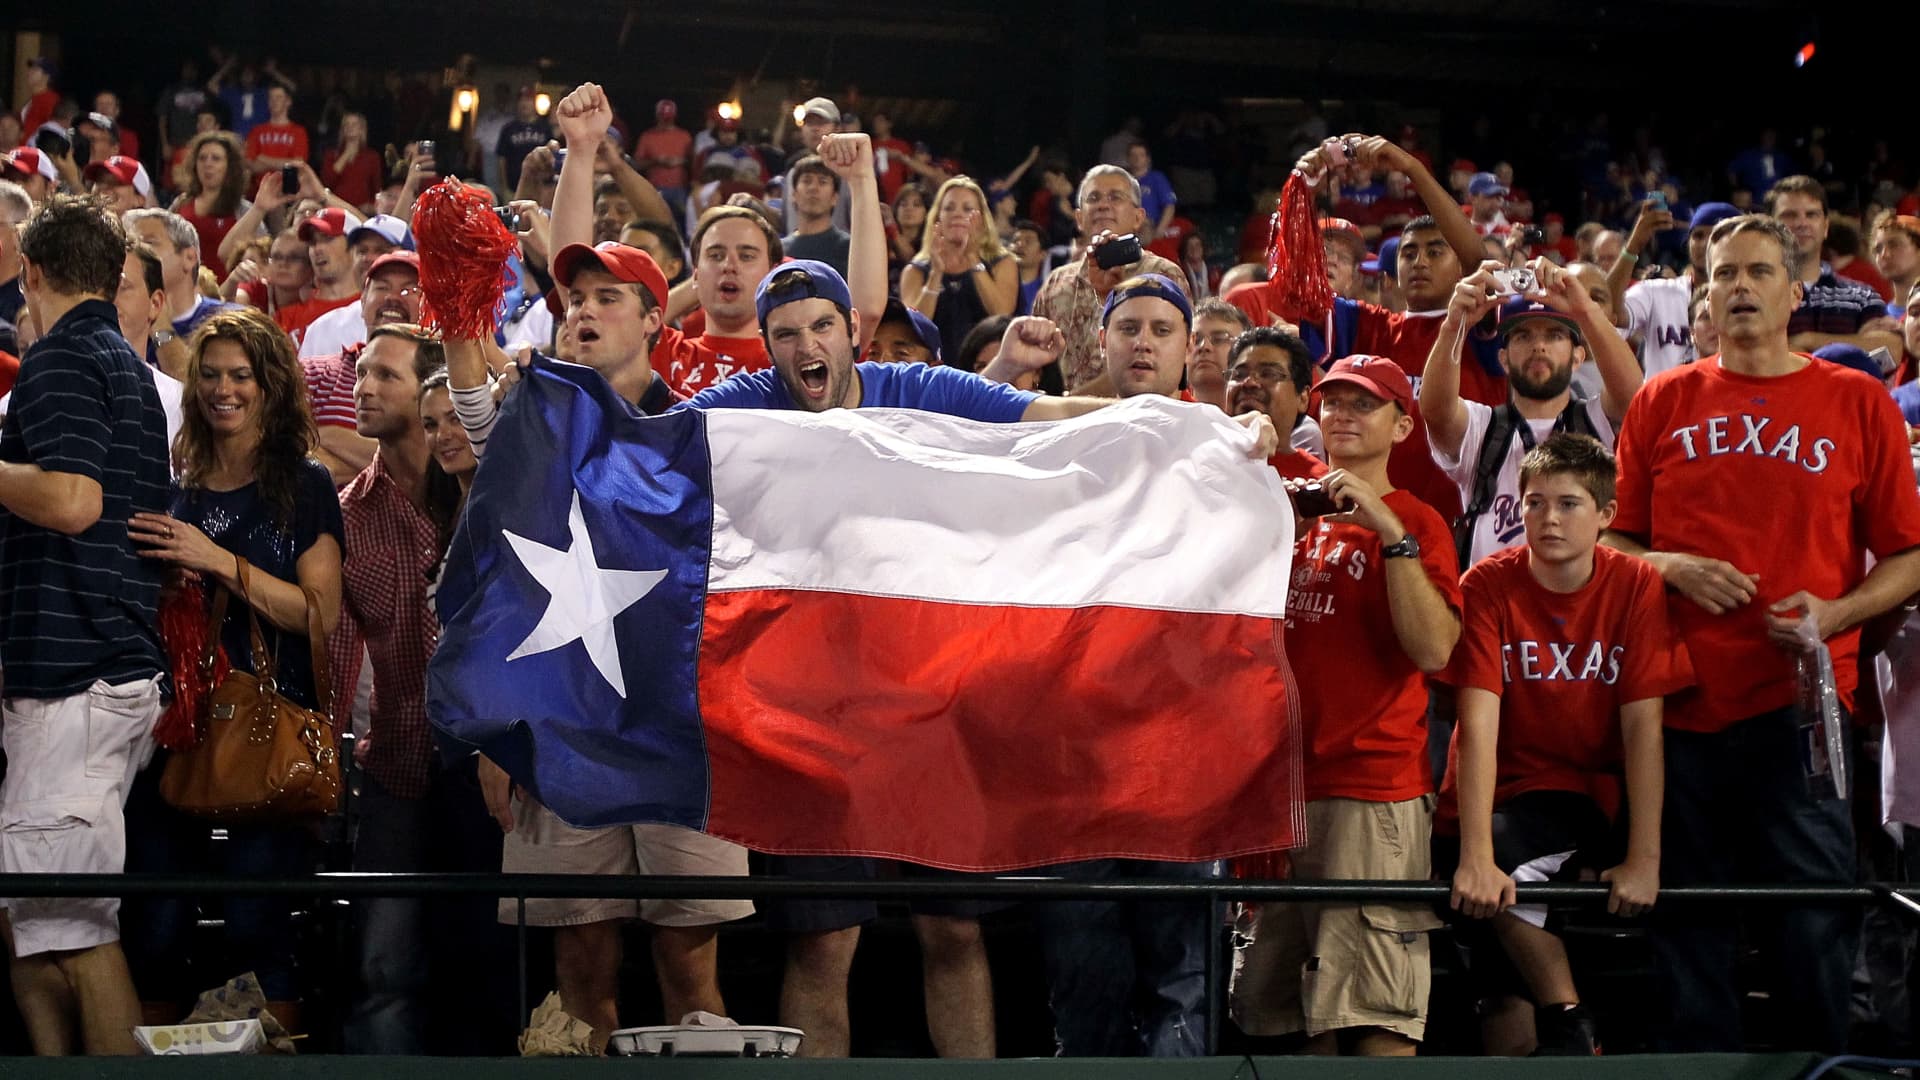 Fans of the Texas Rangers hold a Texas state flag at a game in Arlington, Texas.